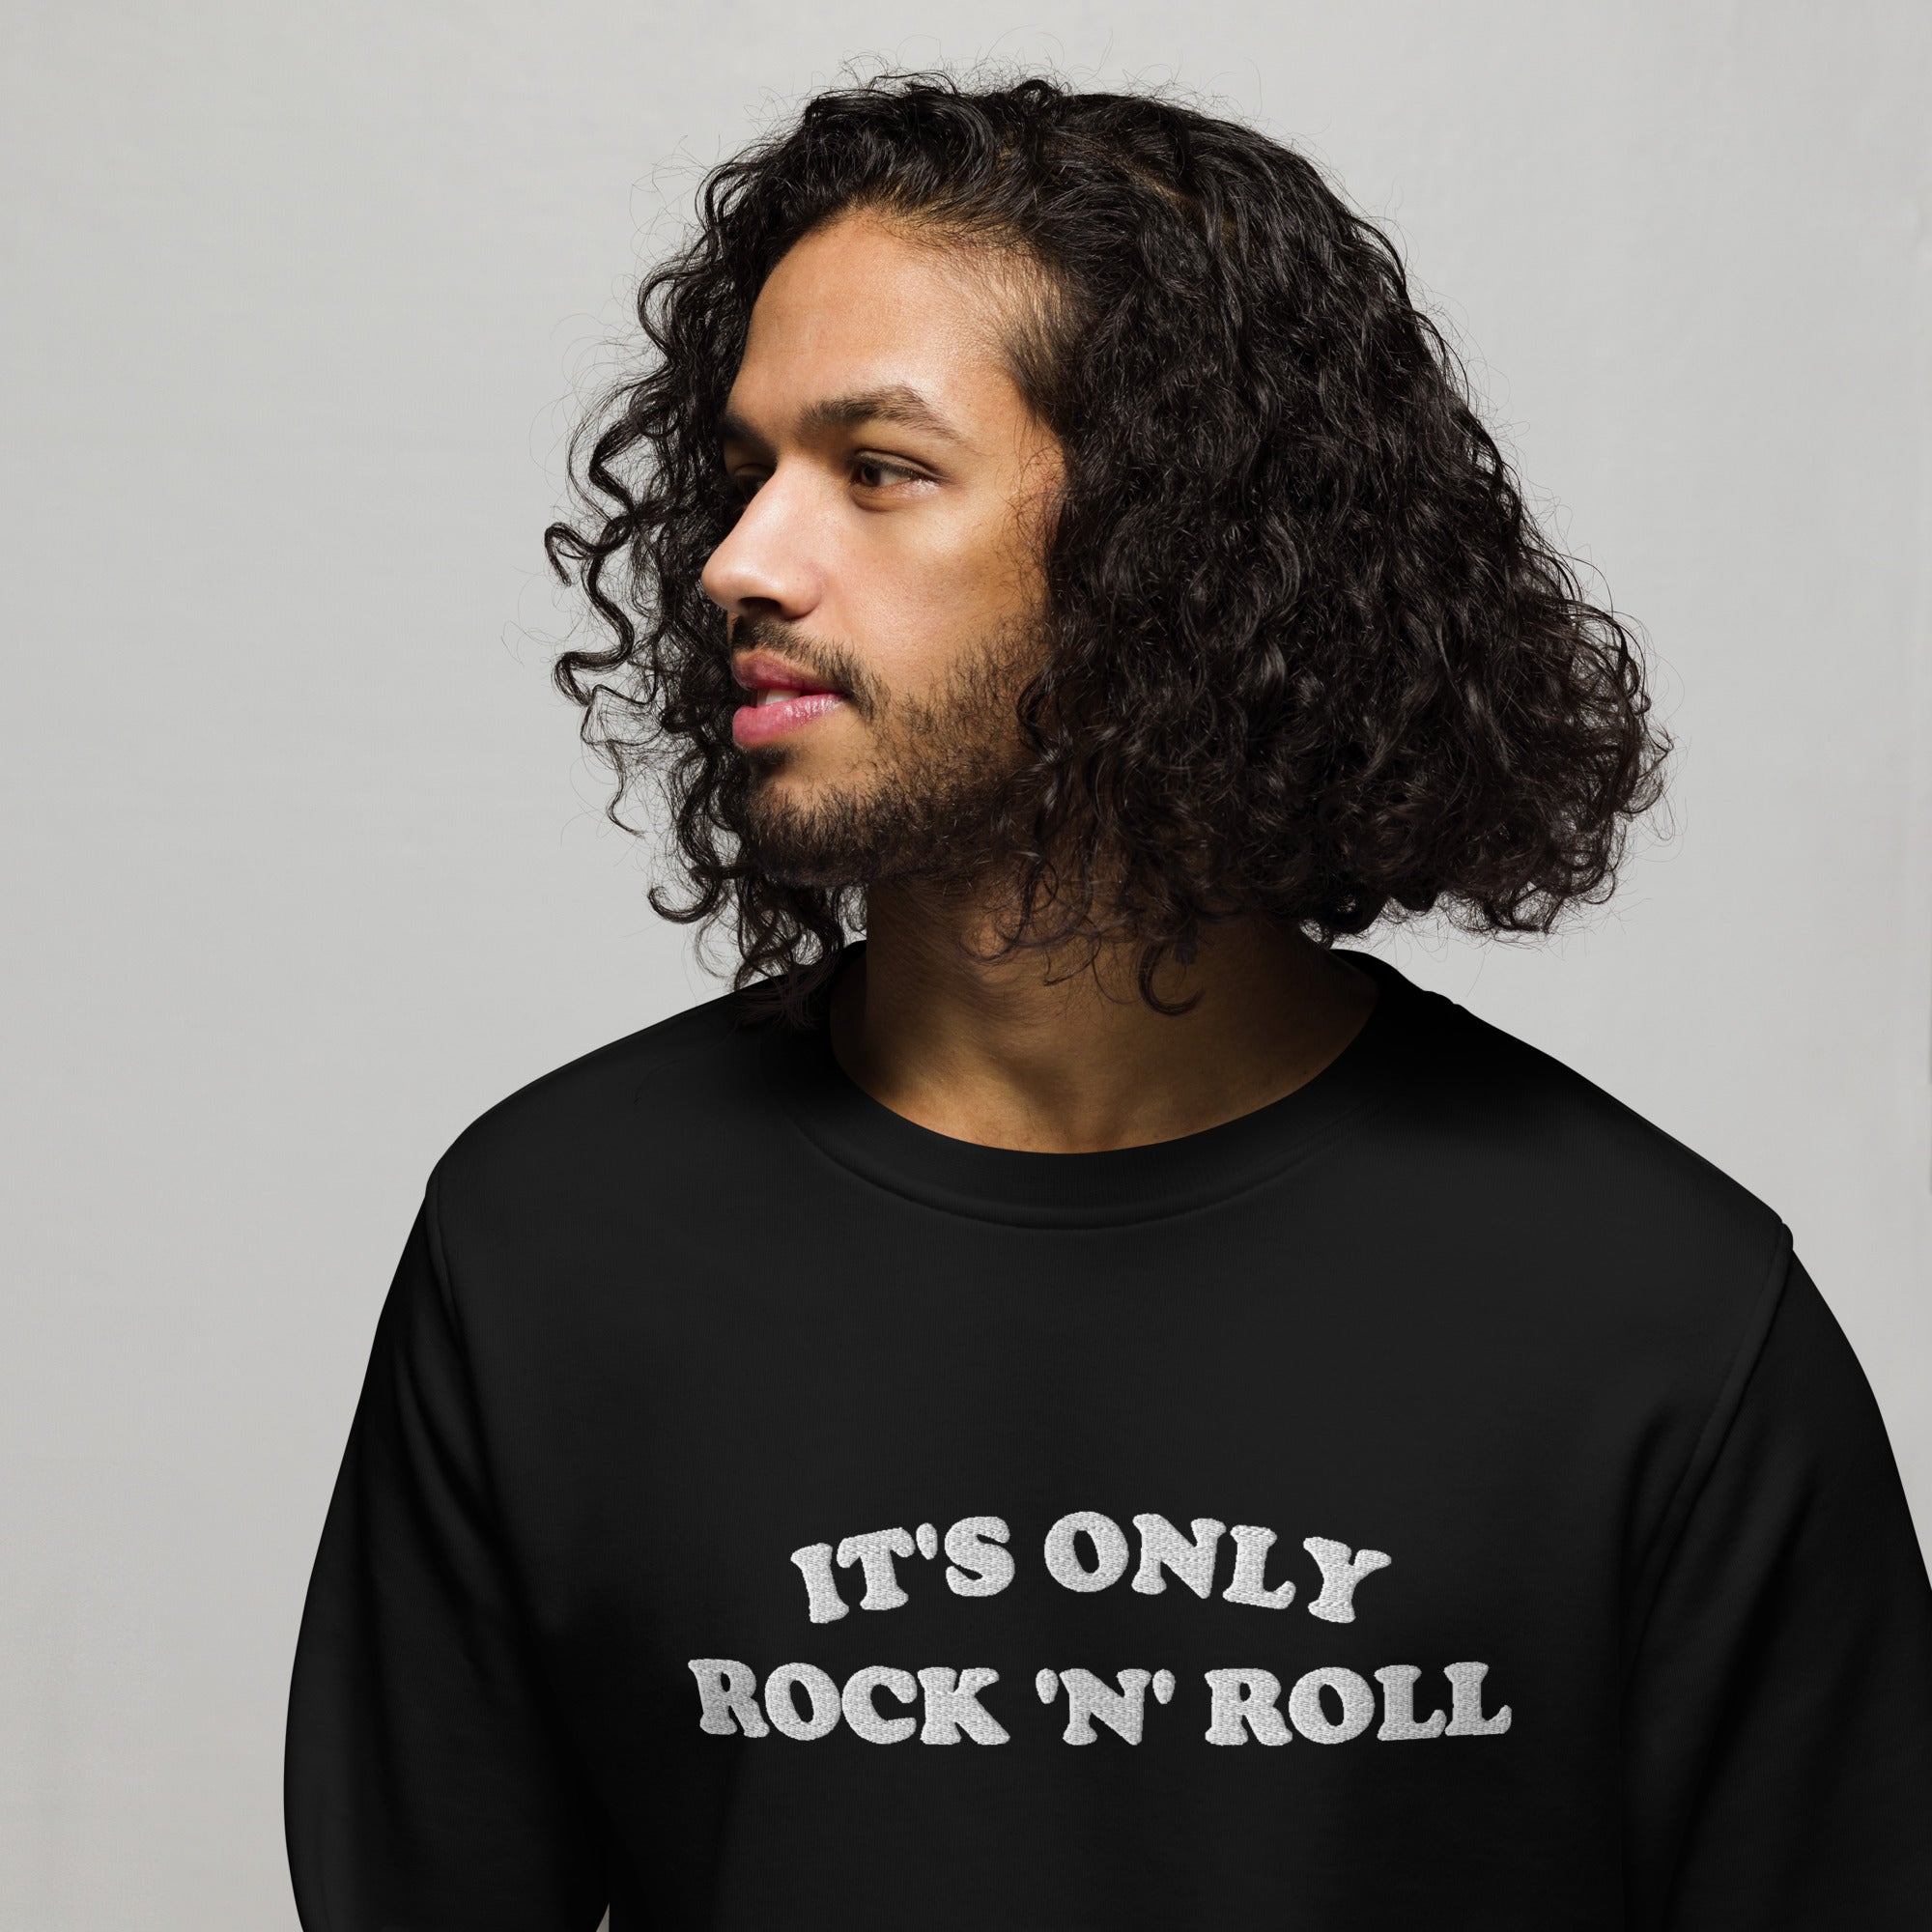 IT'S ONLY ROCK 'N' ROLL Embroidered Unisex Organic Sweatshirt